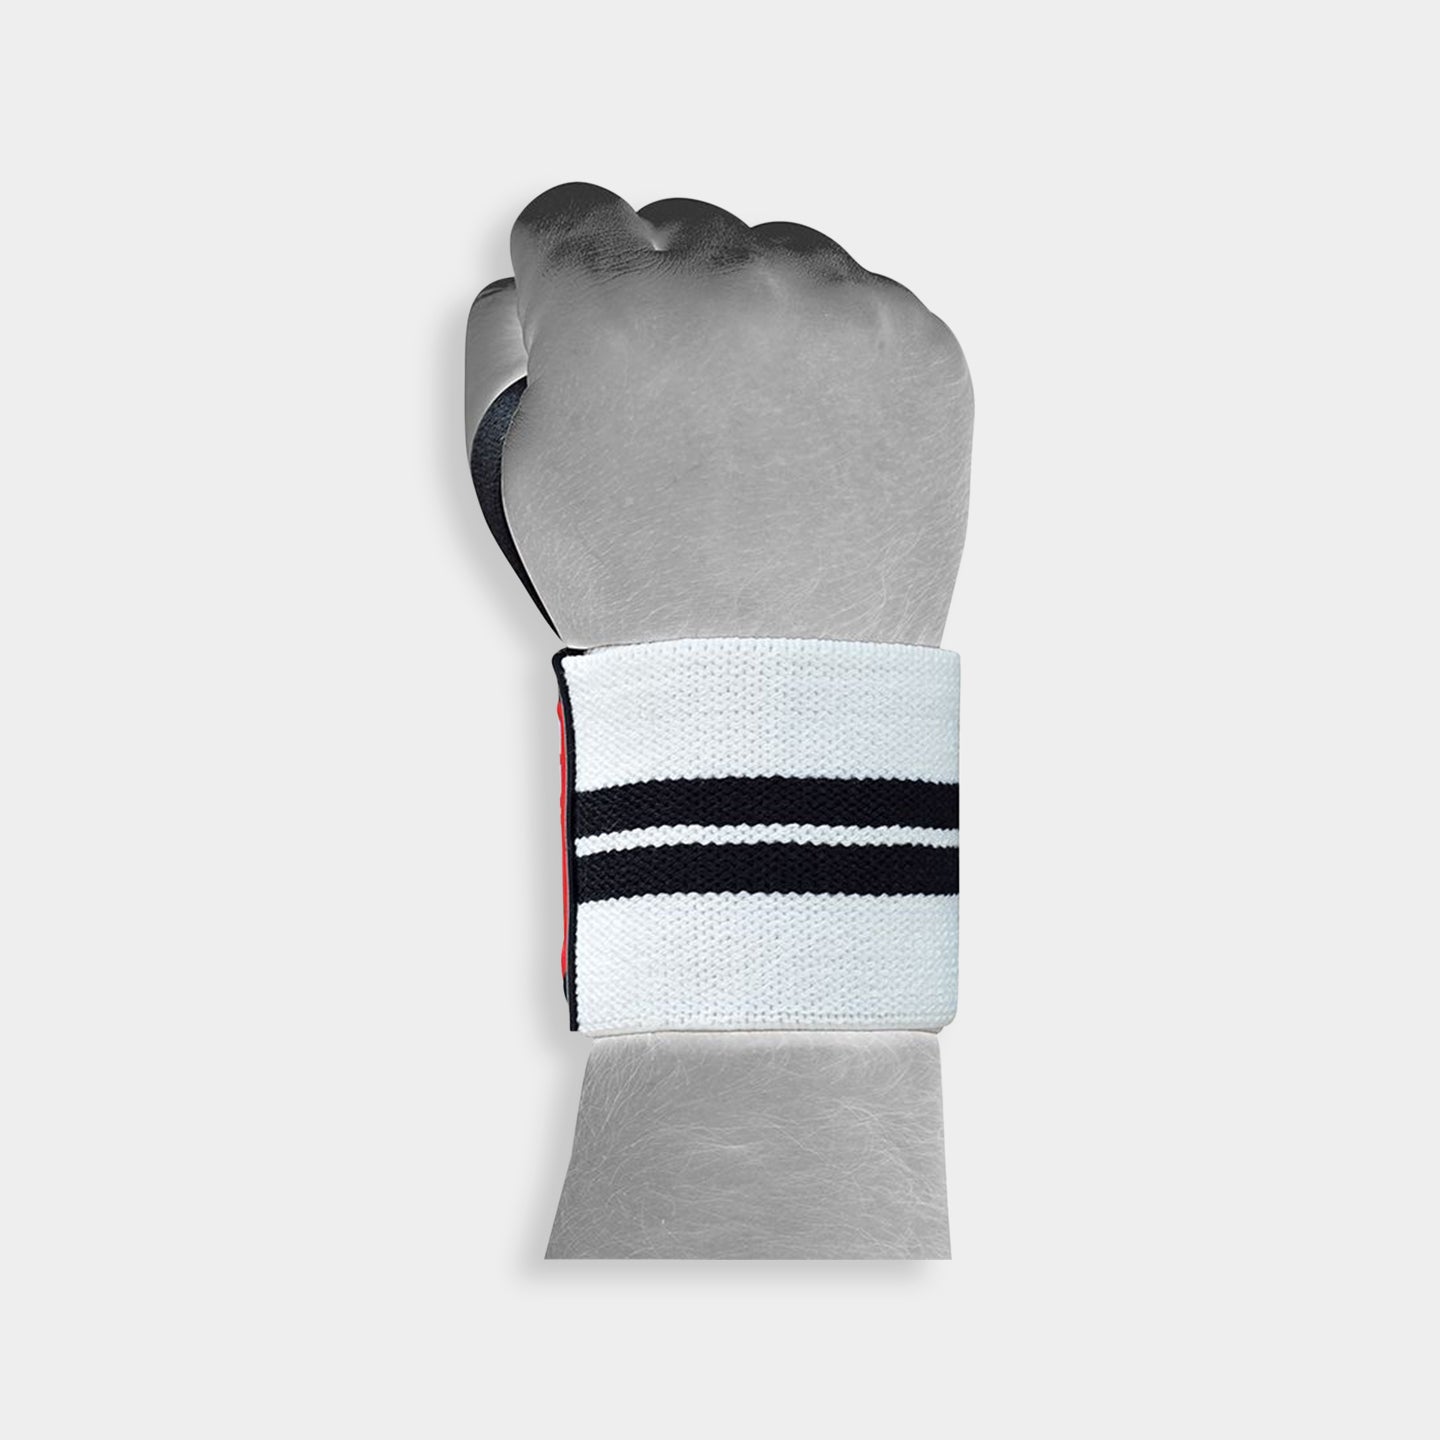 RDX Sports W3W Weight Lifting Wrist Support Wraps With Thumb Loops, Standard Size, Black/White A2